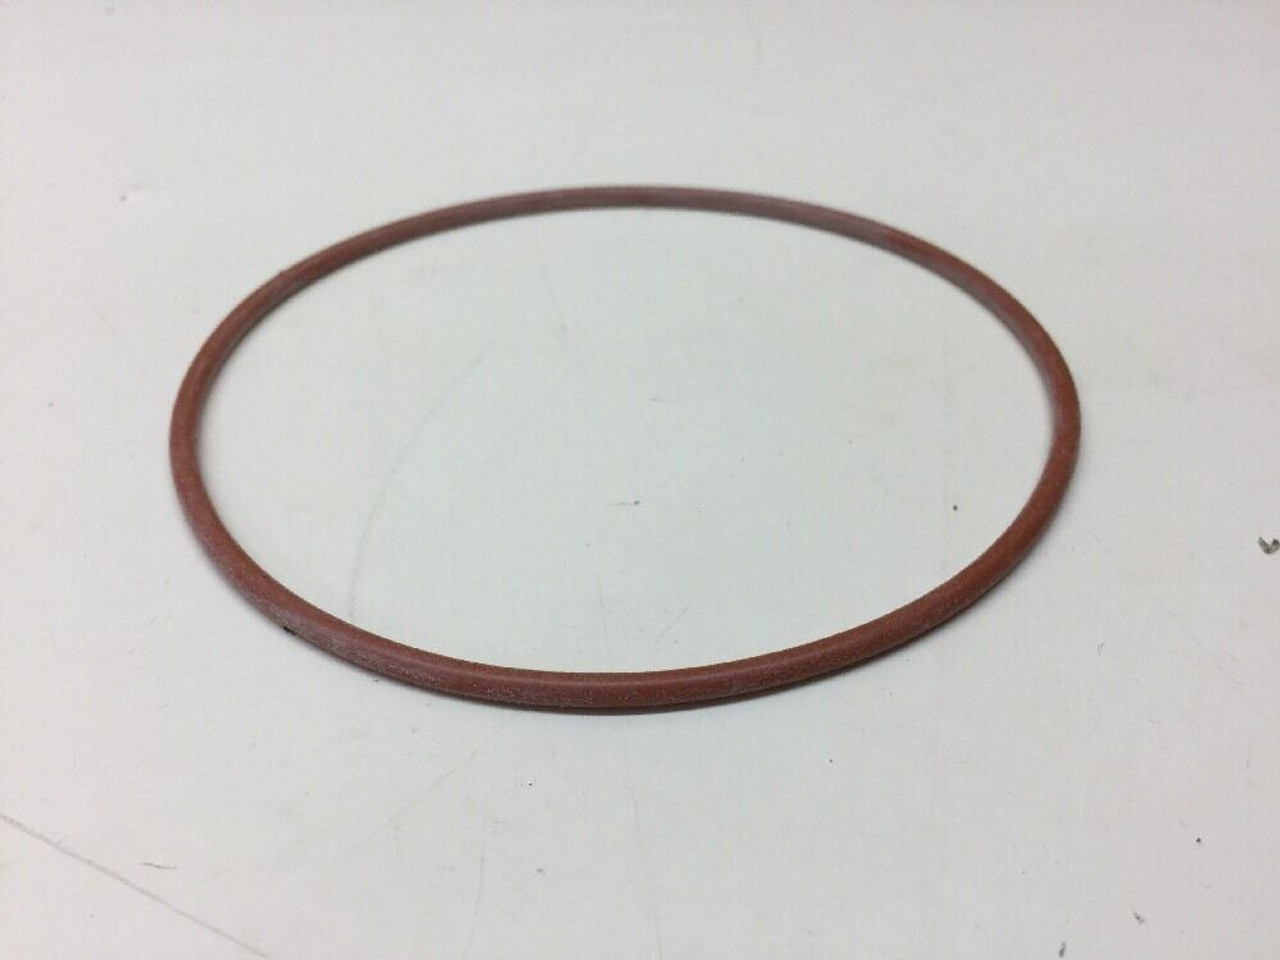 Preformed O-Ring Seal AS3582-247 Rubber Silicone